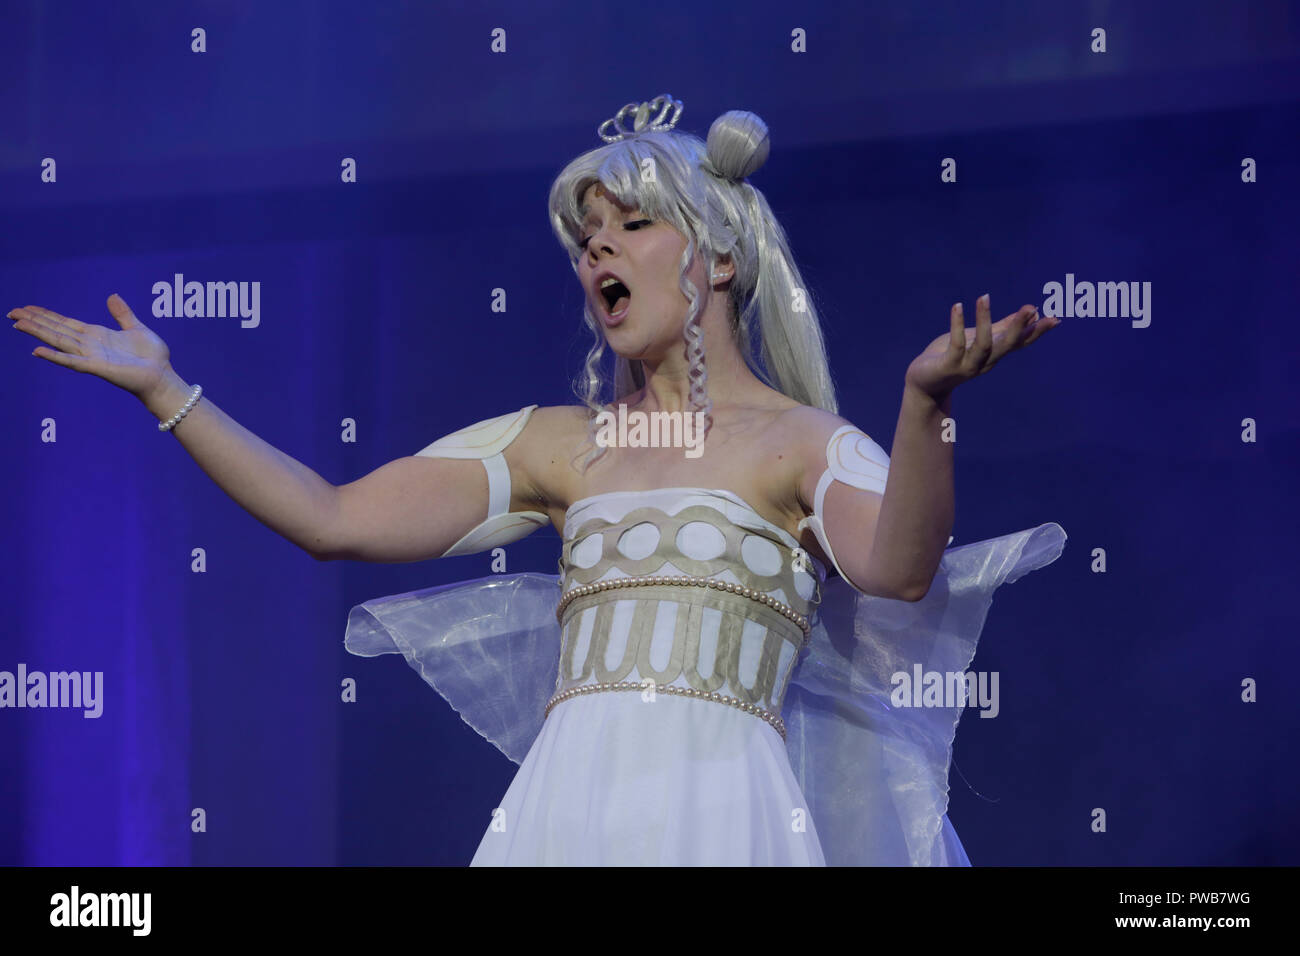 Frankfurt, Germany. 14th October 2018. A participant performs on stage as  Neo Queen Serenity from the anime series Sailor Moon Crystal. The 12.  German Cosplay Championship was held as part of the